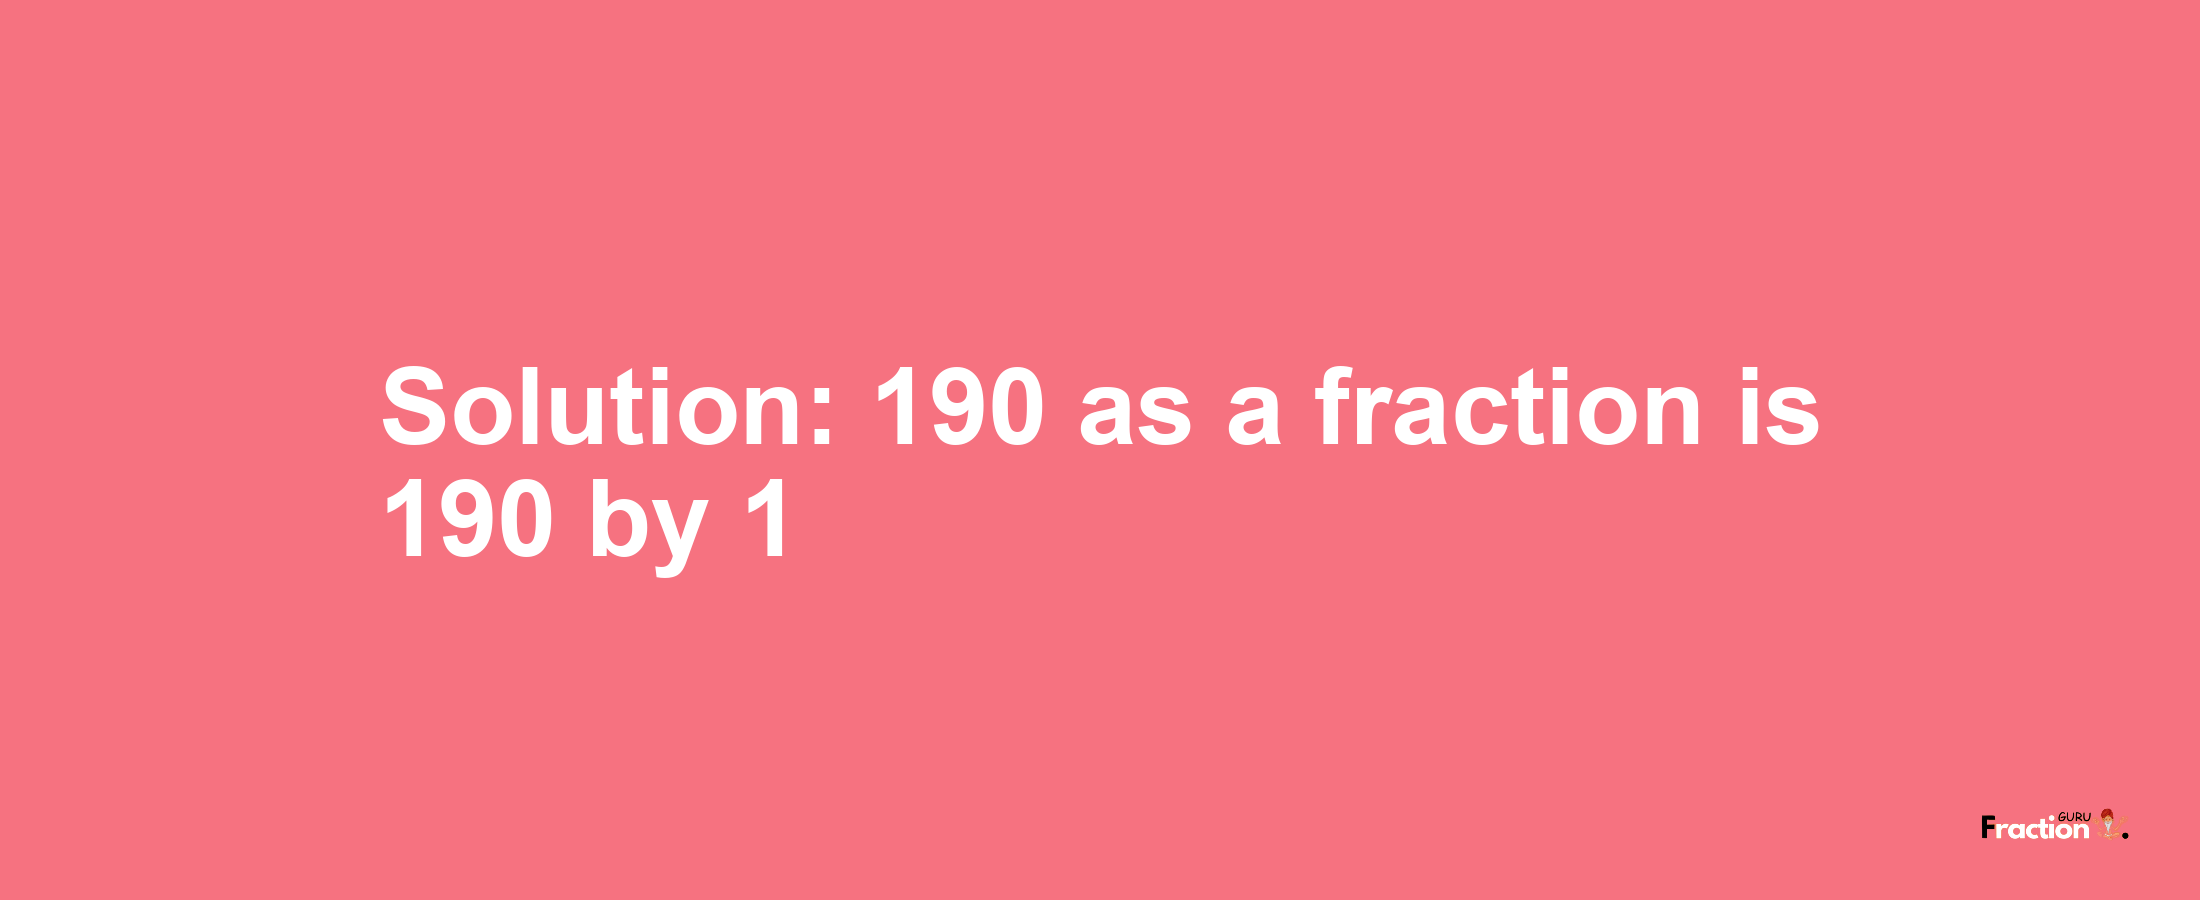 Solution:190 as a fraction is 190/1